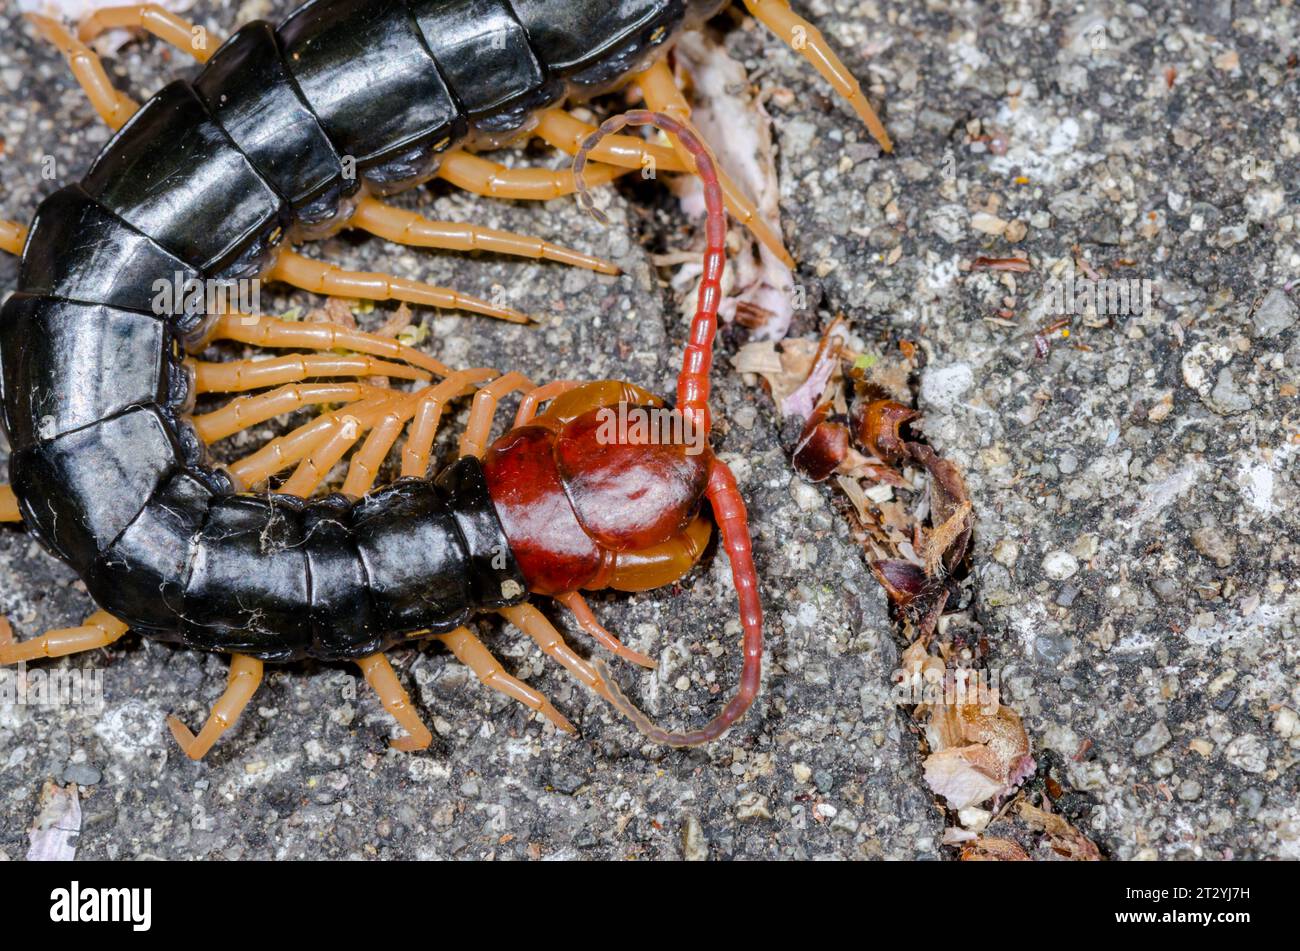 Head of Japanese Giant Centipede (Scolopendra subspinipes mutilans). Kobe, Japan Stock Photo